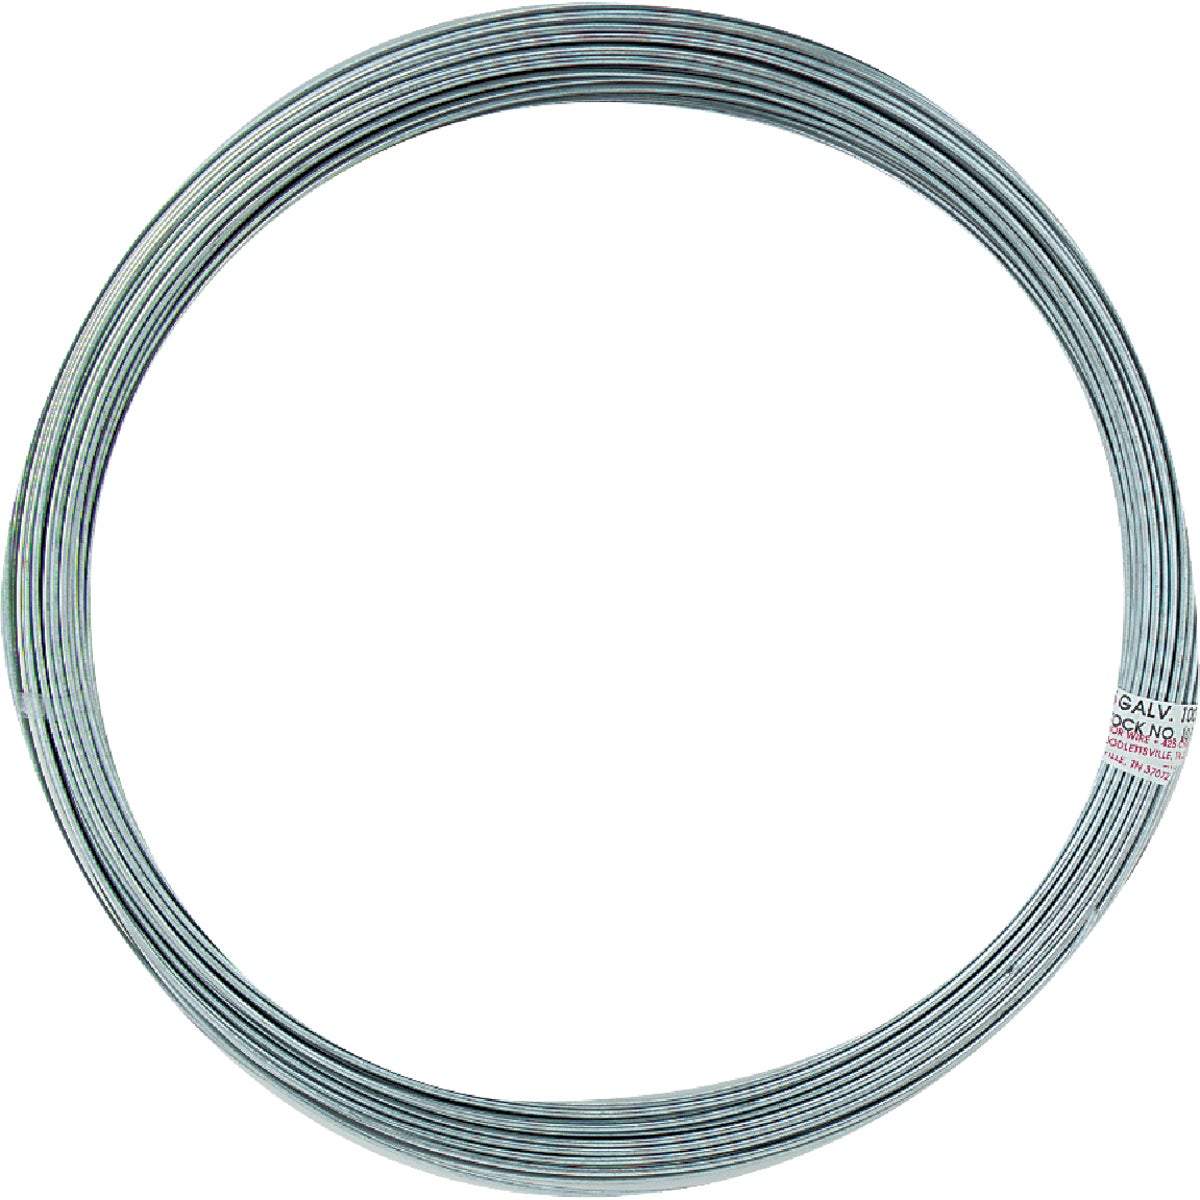 Item 718496, General purpose wire is also known as weaving wire.